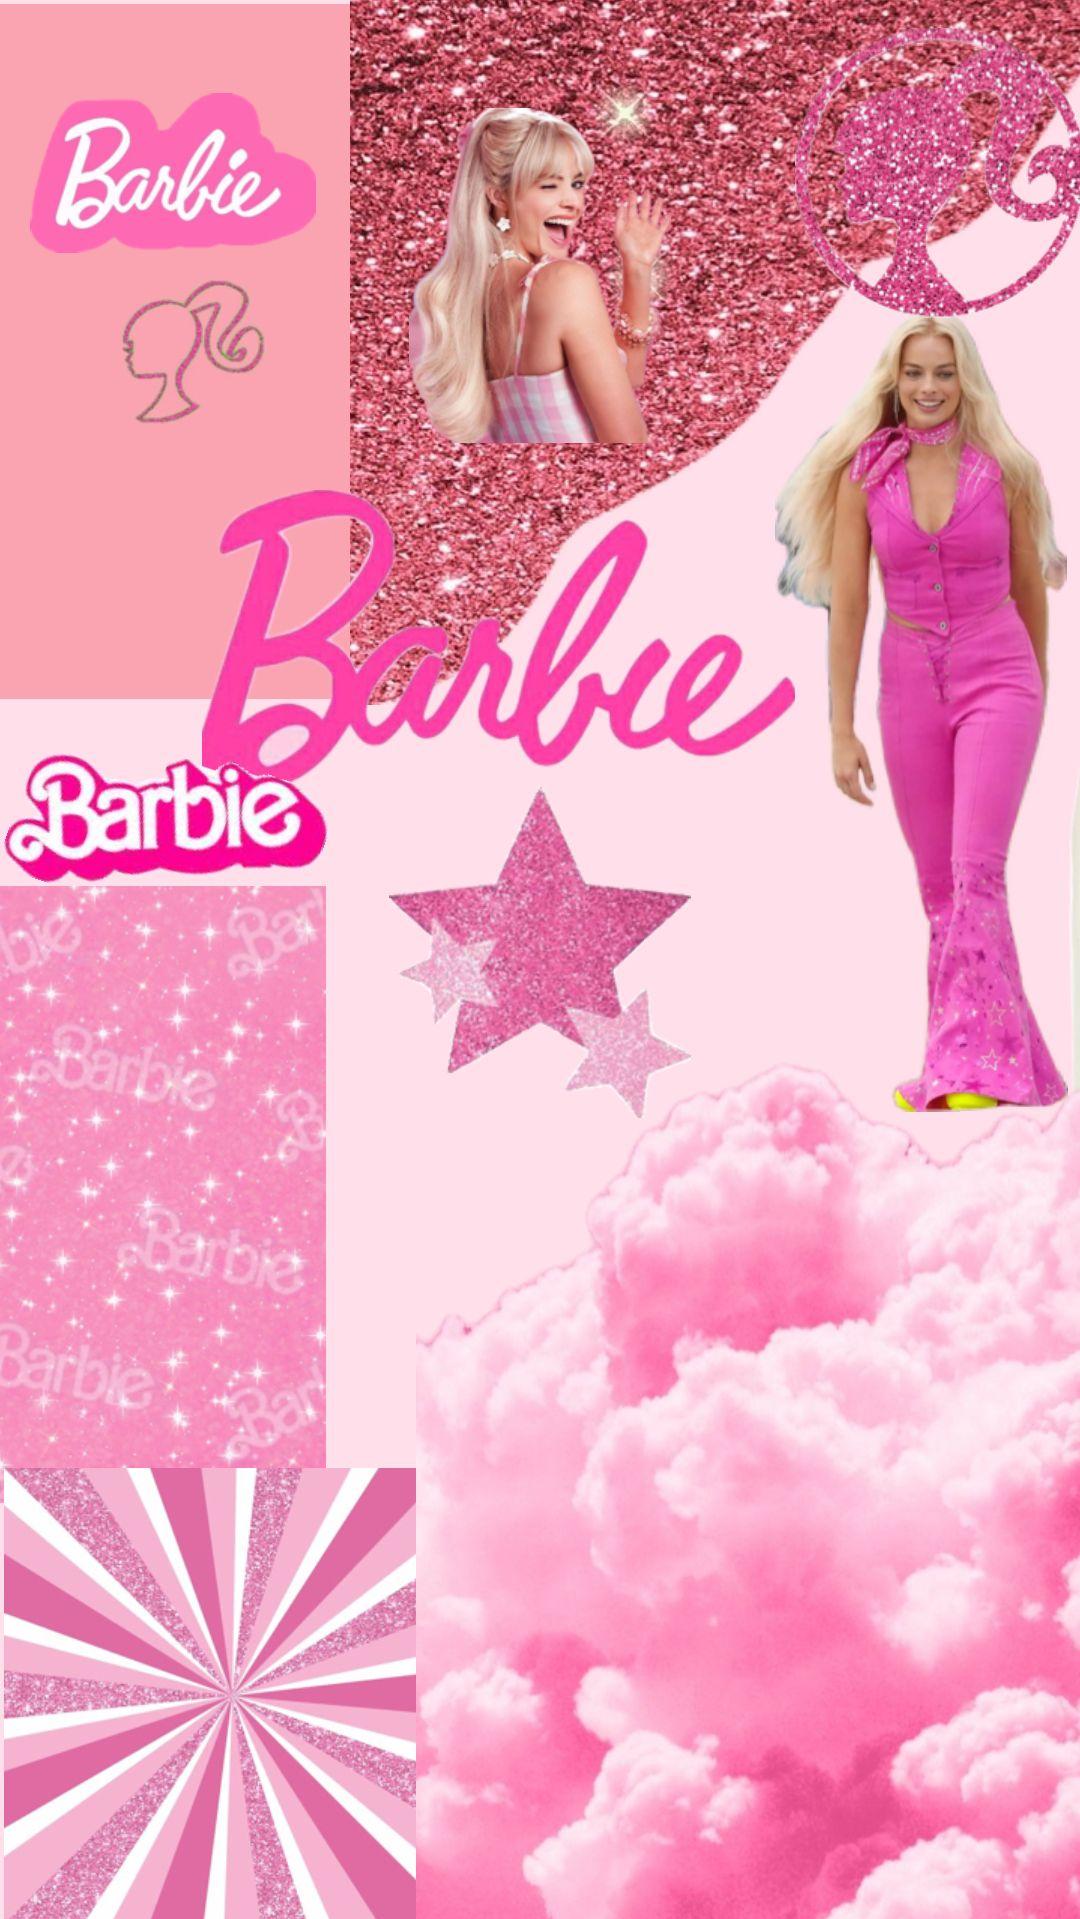 Check Out Lundiasimus S Shuffles In Barbie Image